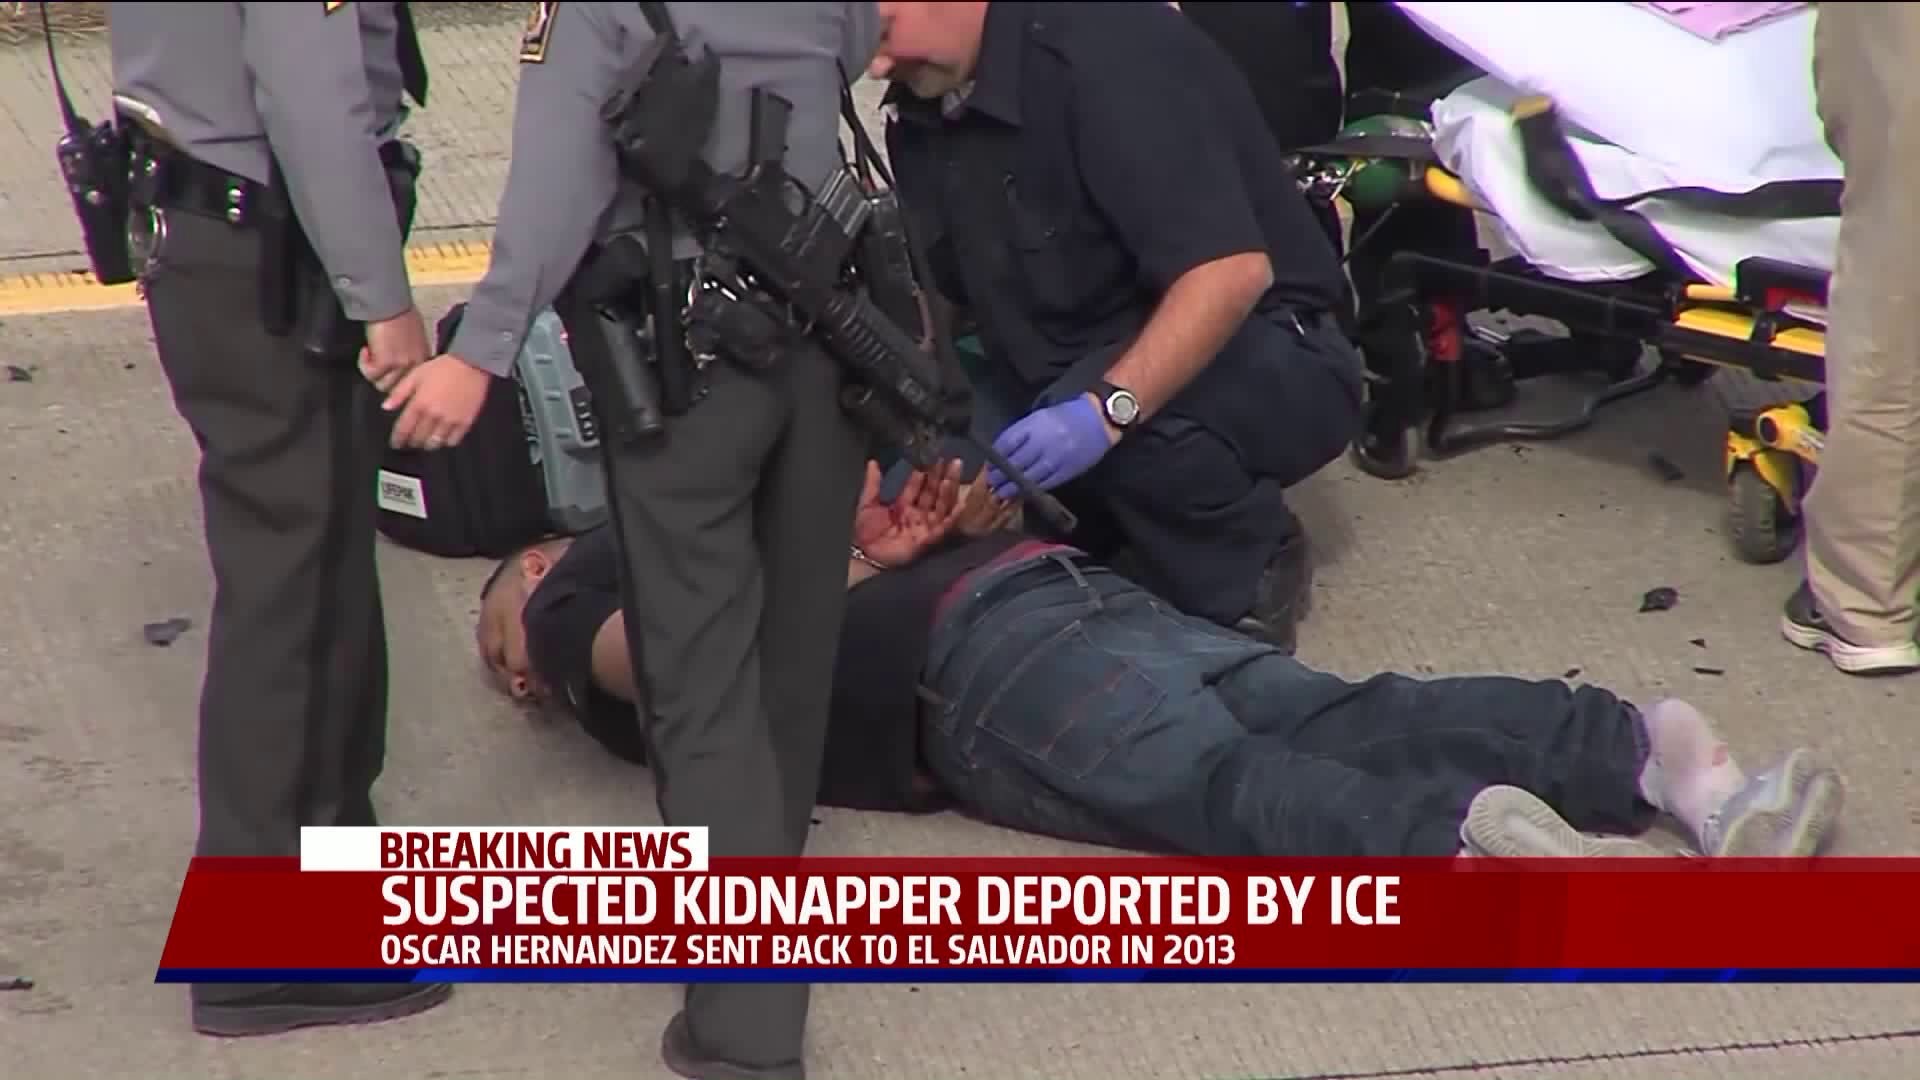 ICE officials: Murder suspect was deported in 2013